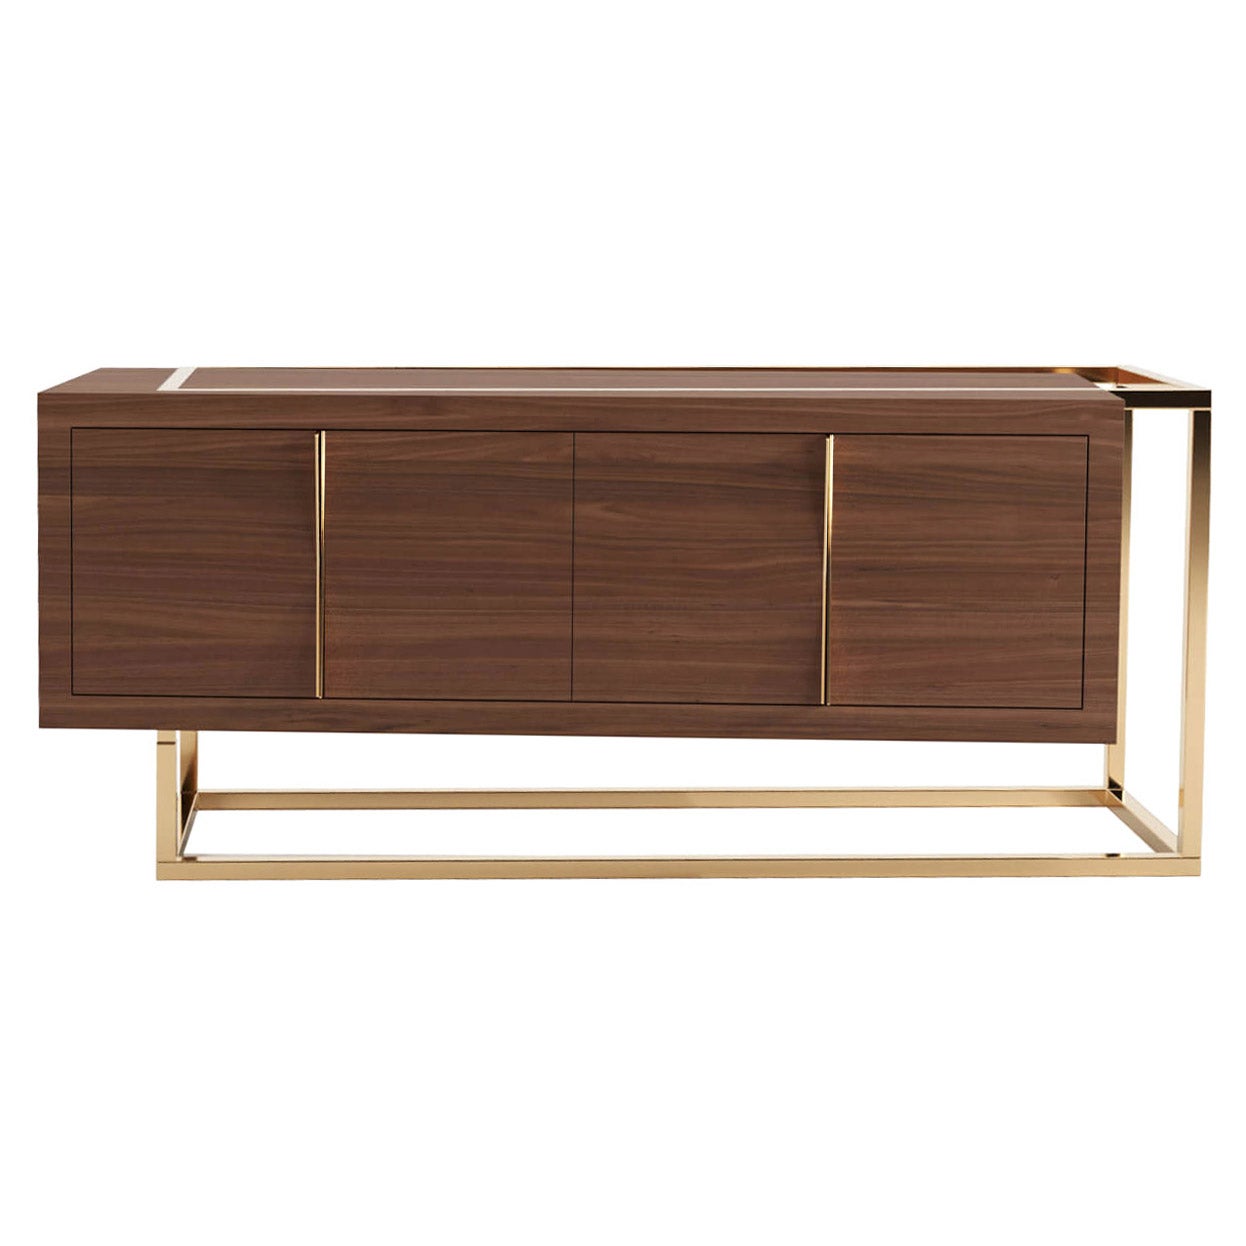 21st Century Modern Credenza Sideboard in Walnut Wood and Brushed Brass